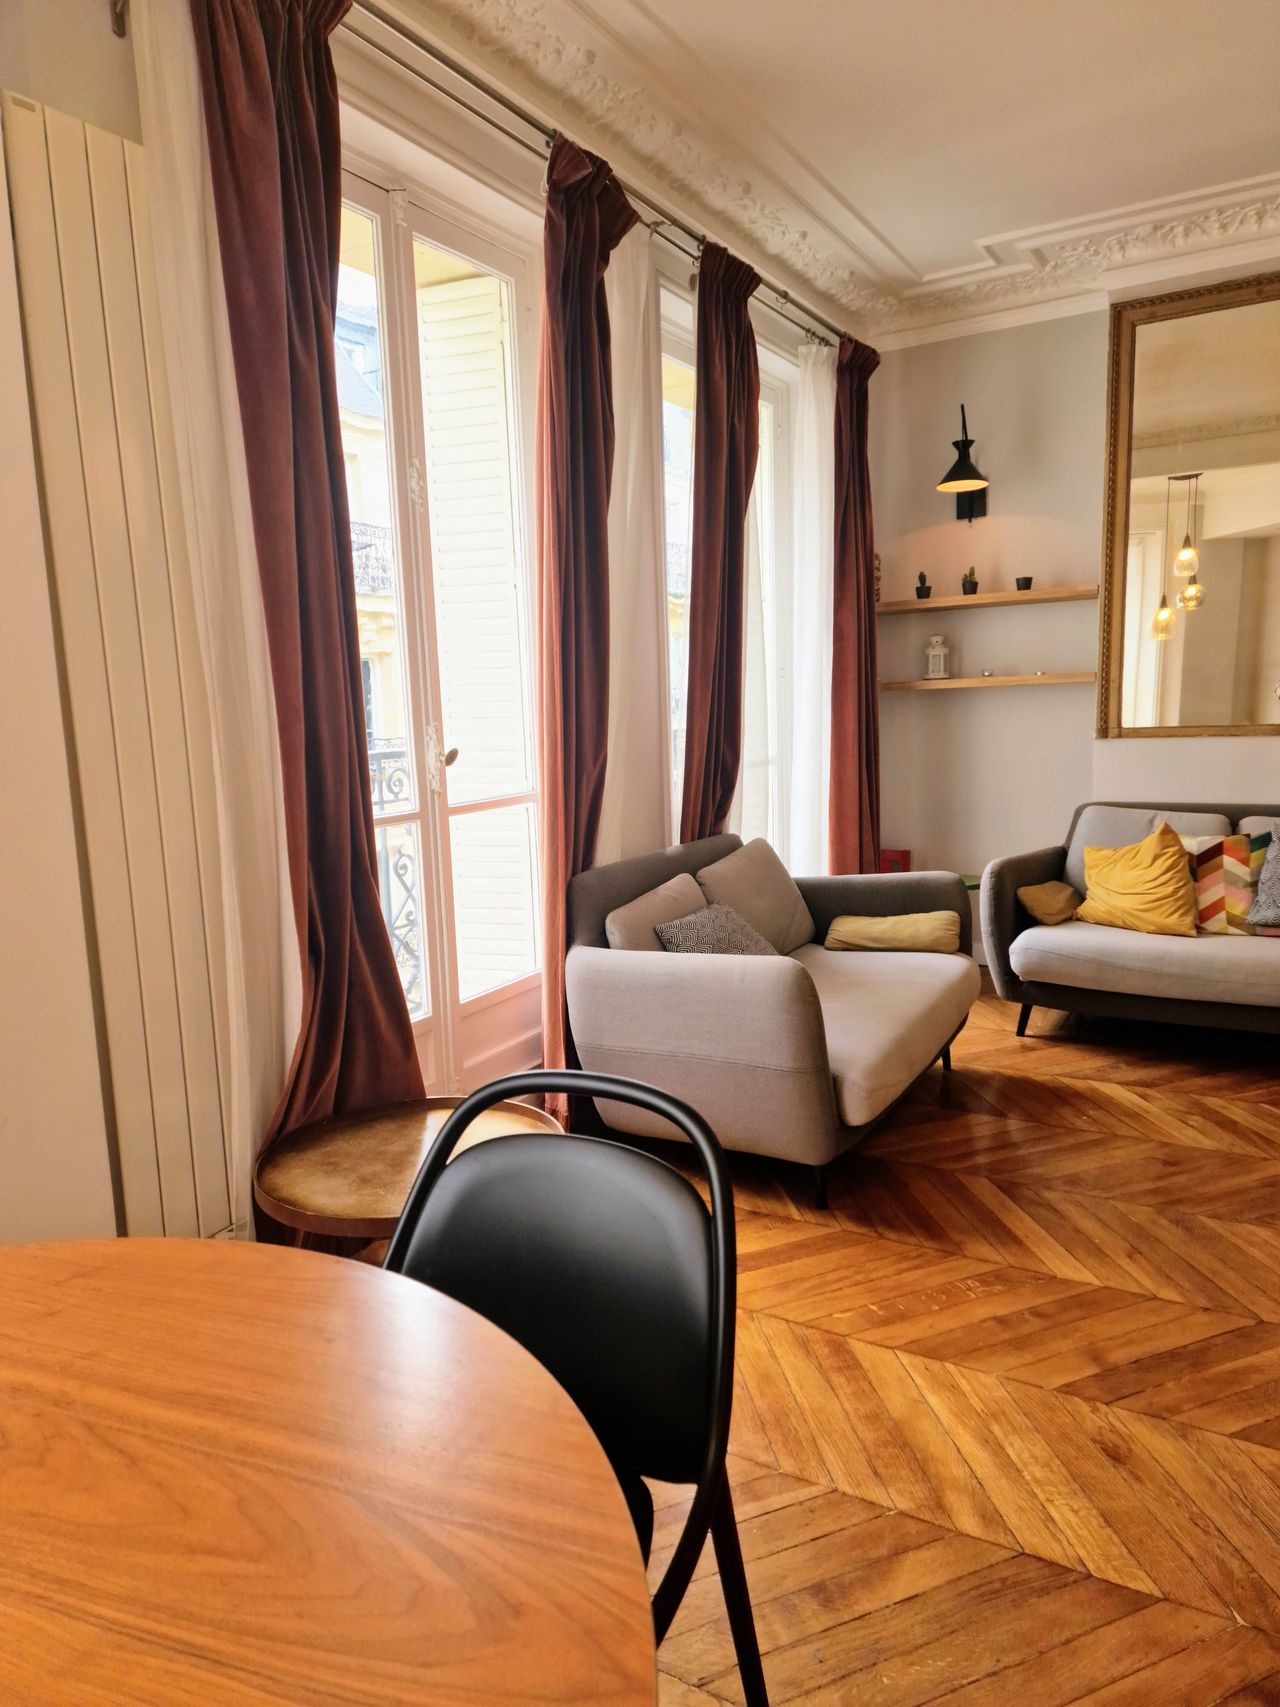 Upscale flat just a short walk from the Arc de Triomphe